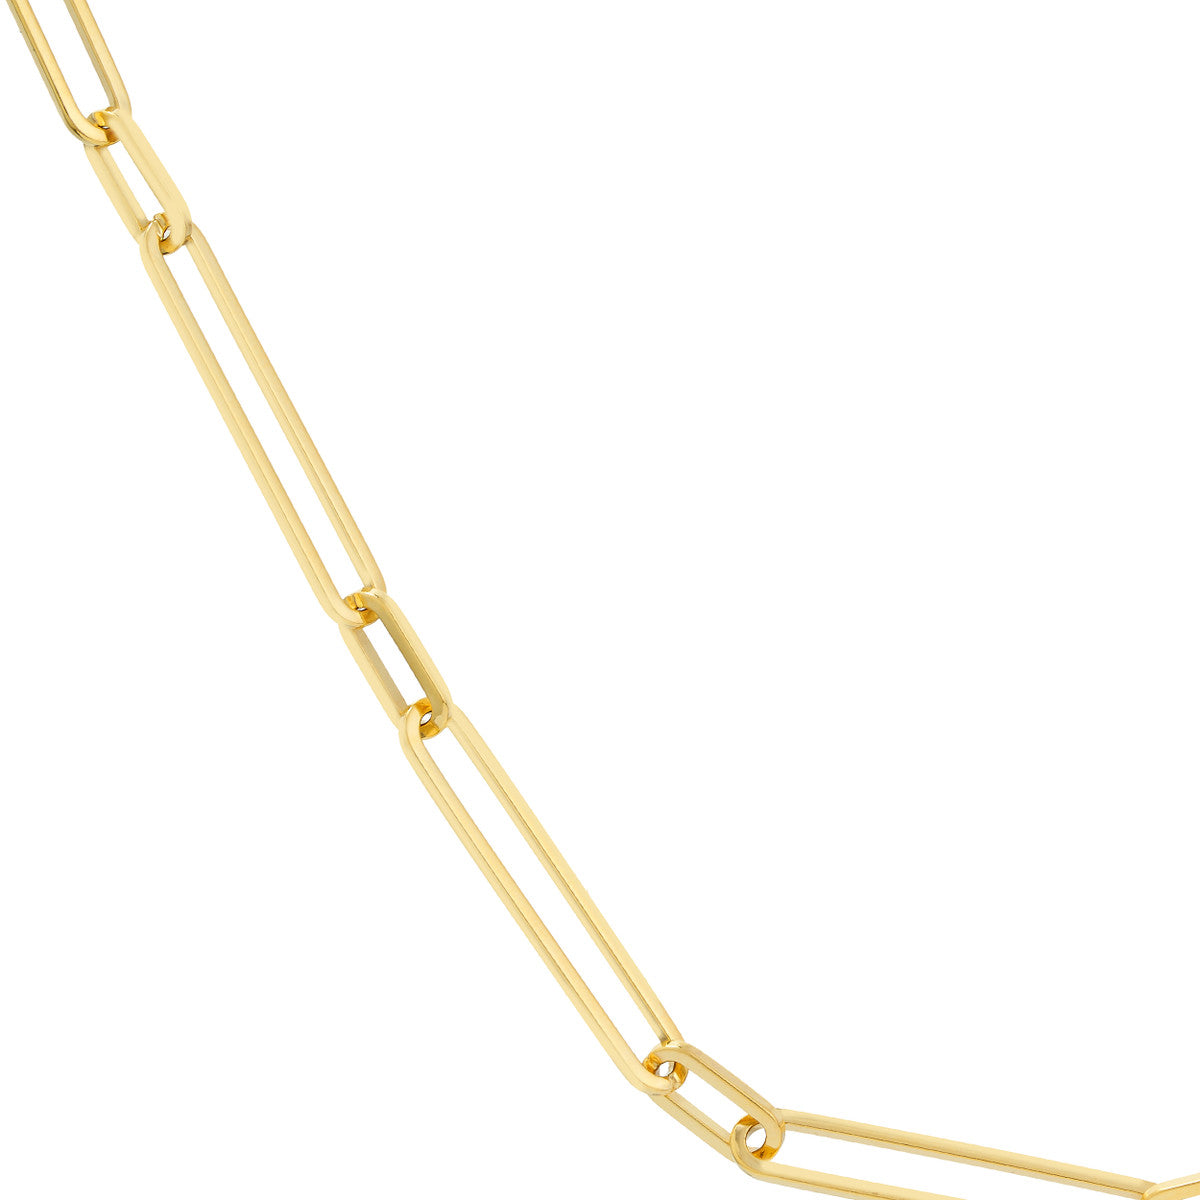 Alternating Length Long Link Chain Necklace